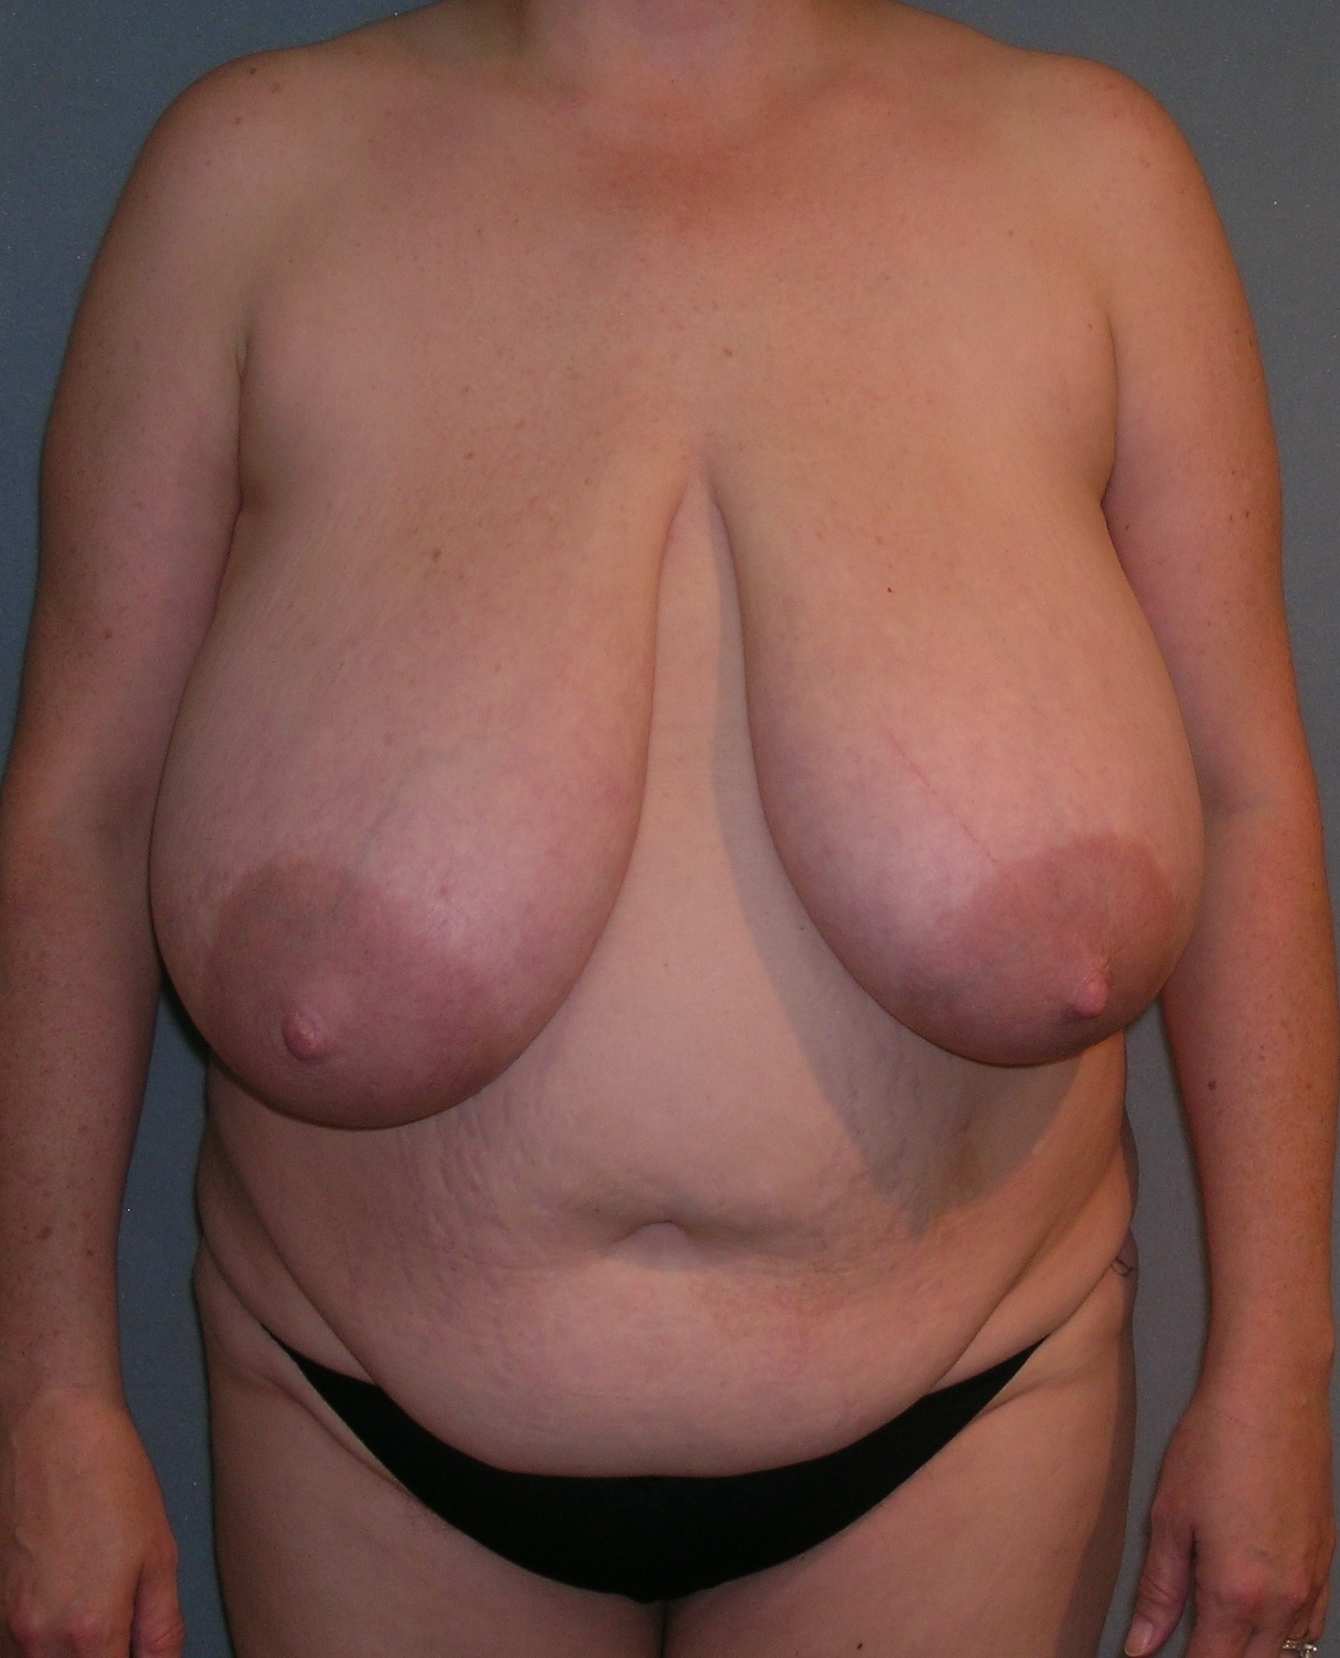 Breast and Abdomen Before and After Photos